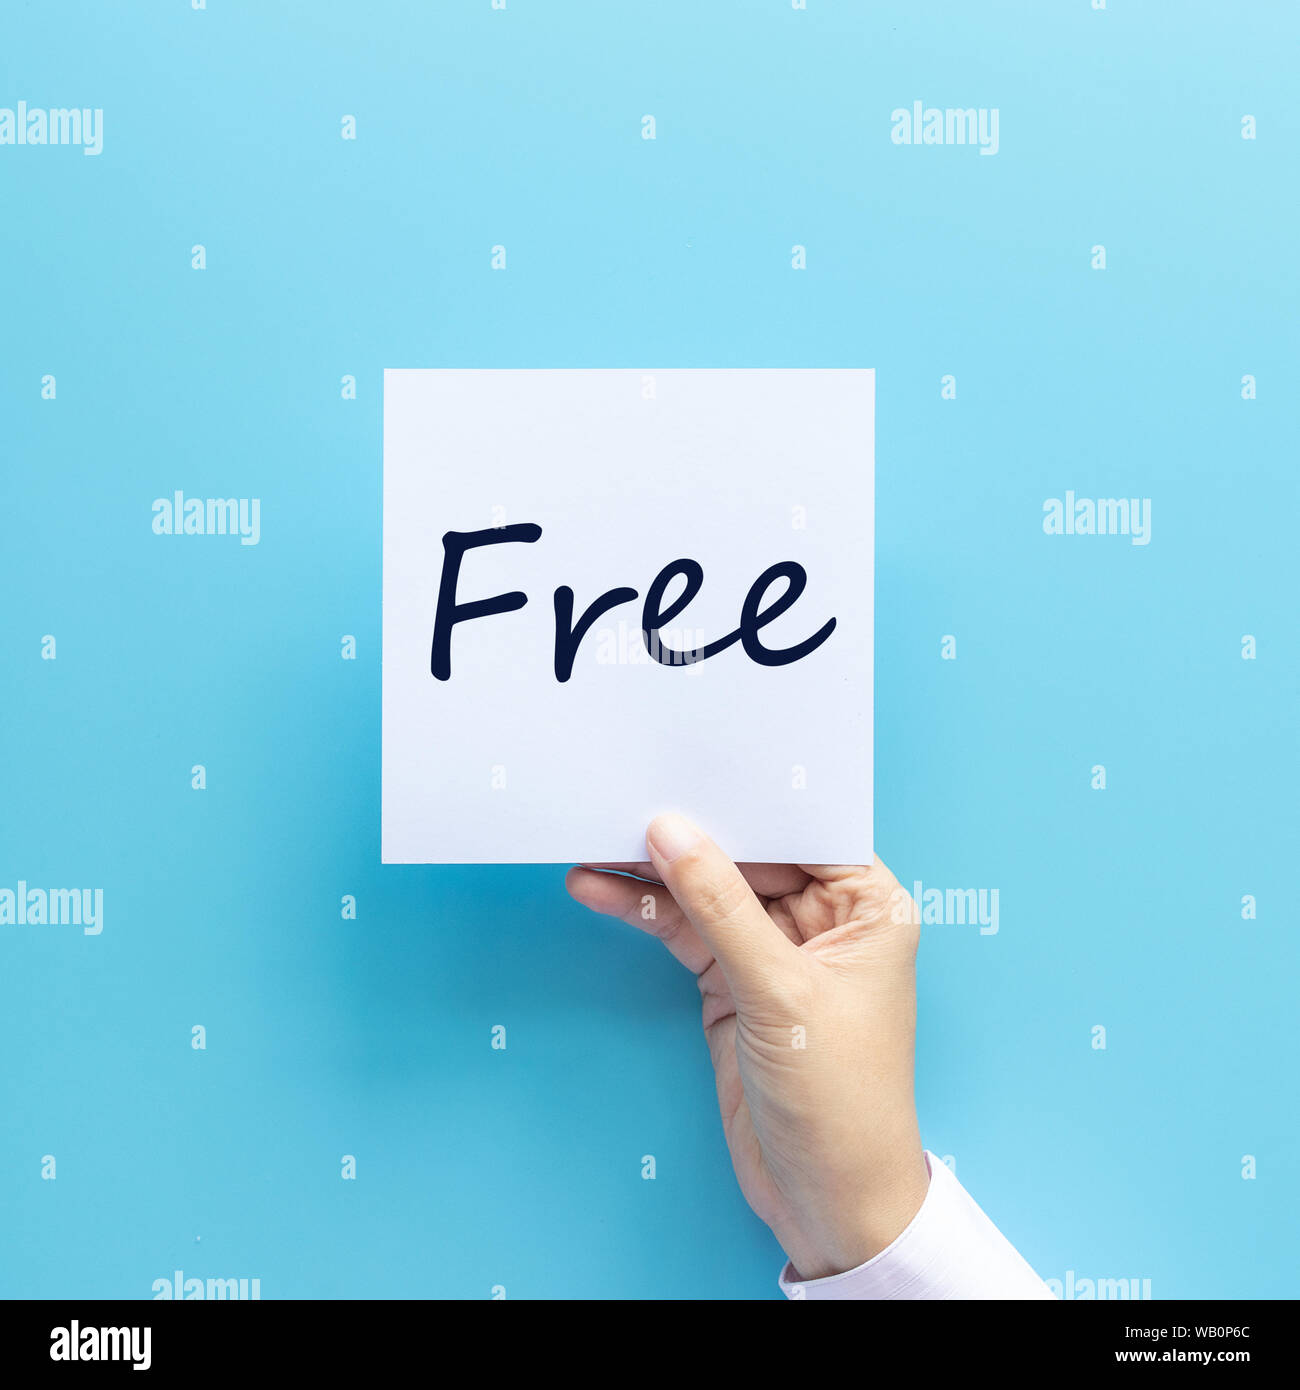 free stuff for advertising concept. hand holding paper with text free isolated on blue background, studio shot Stock Photo